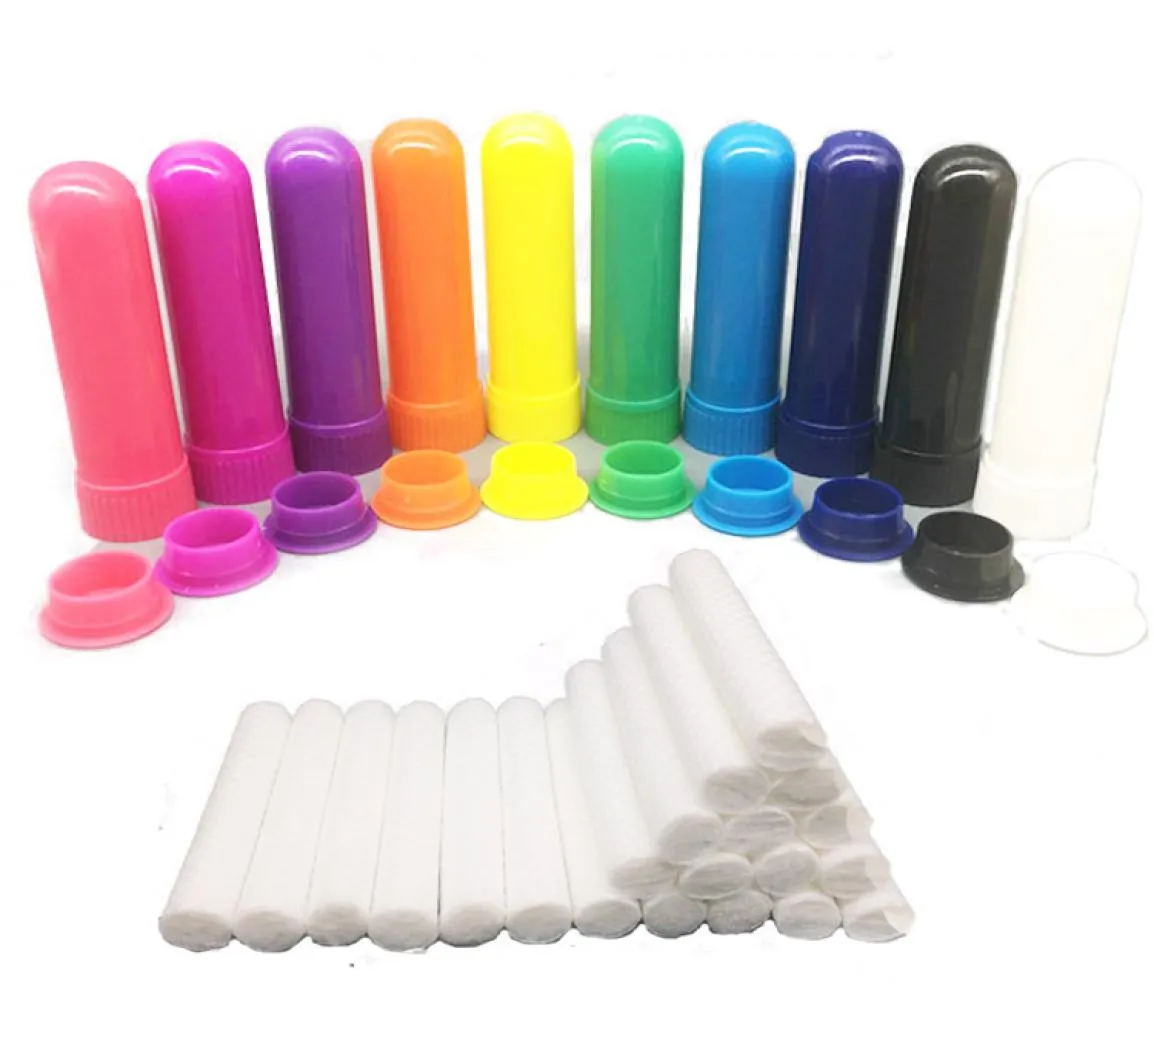 100 Sets Colored Essential Oil Aromatherapy Blank Nasal Inhaler Tubes Diffuser With High Quality Cotton Wicks5623028